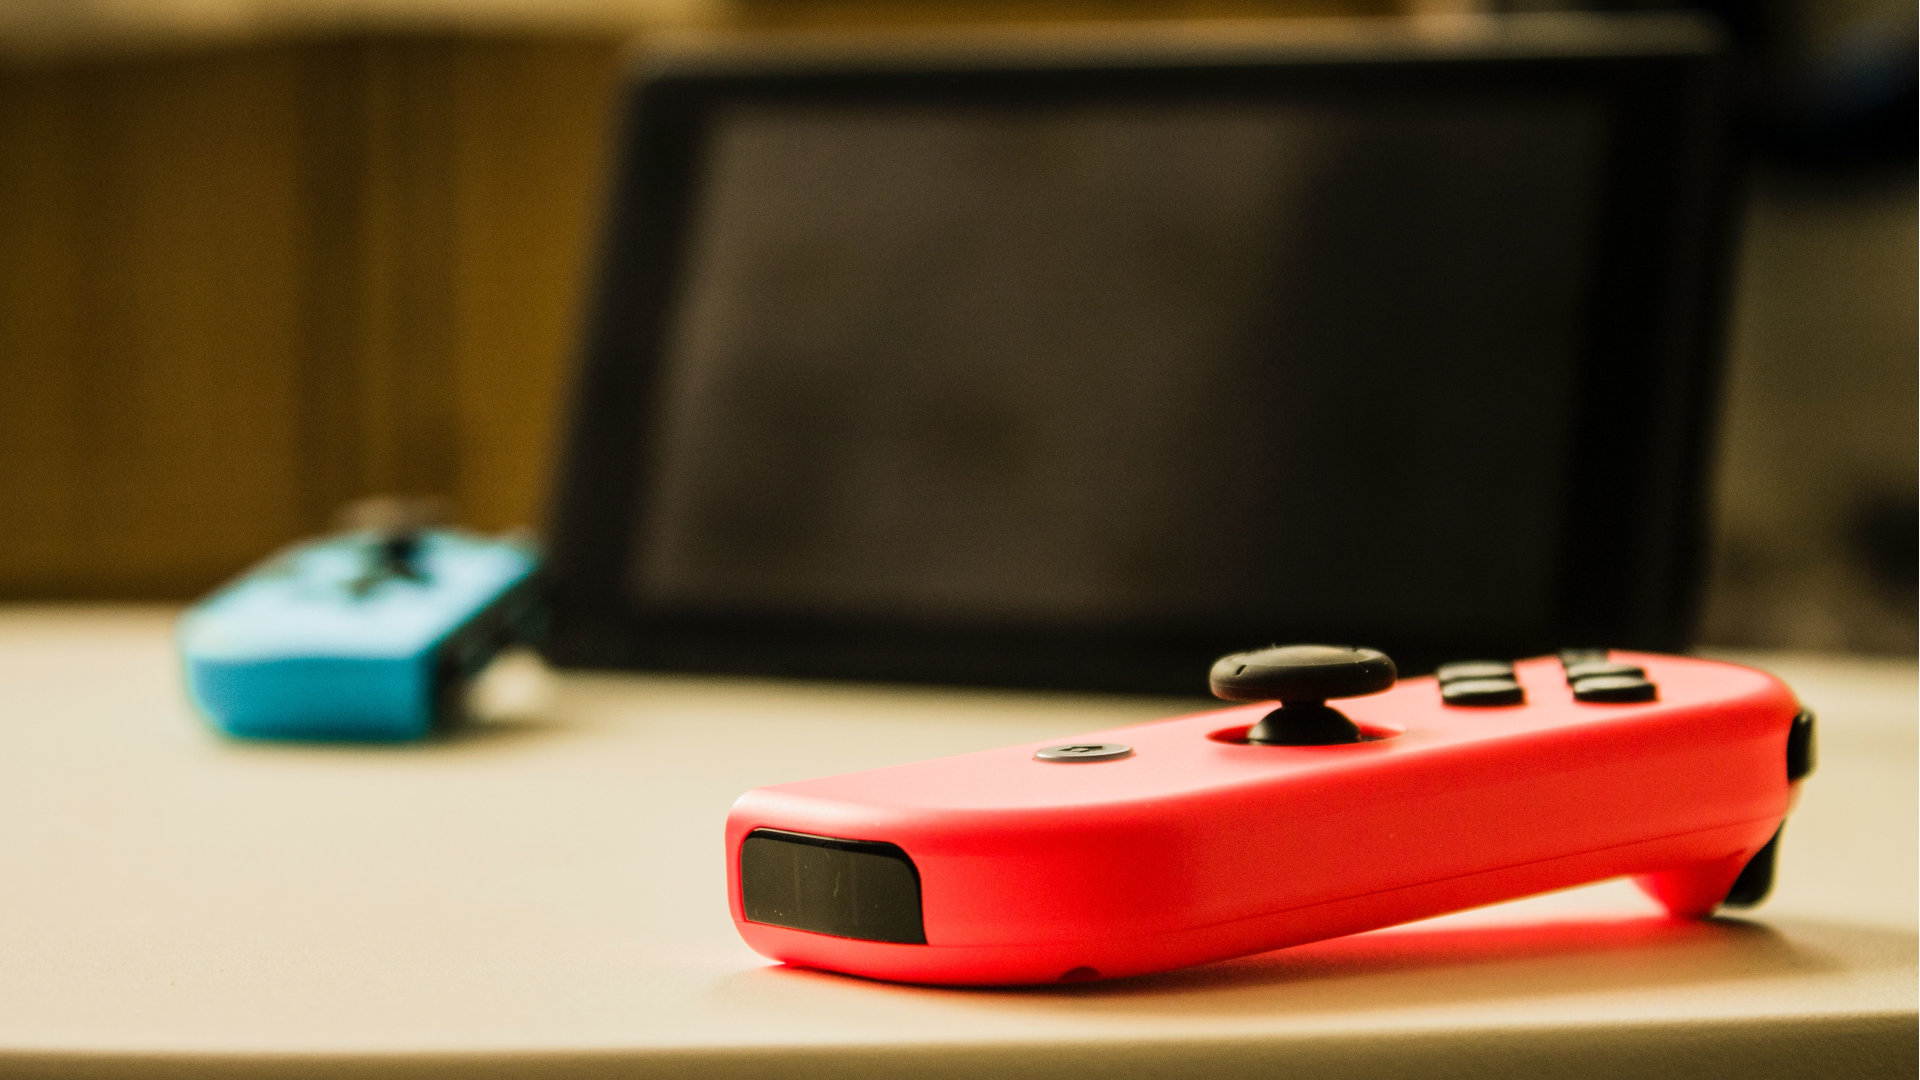 A neon red Joy-Con on a table in the foreground, with a Nintendo Switch screen and blue Joy-Con lying on the table in the background, slightly out of focus